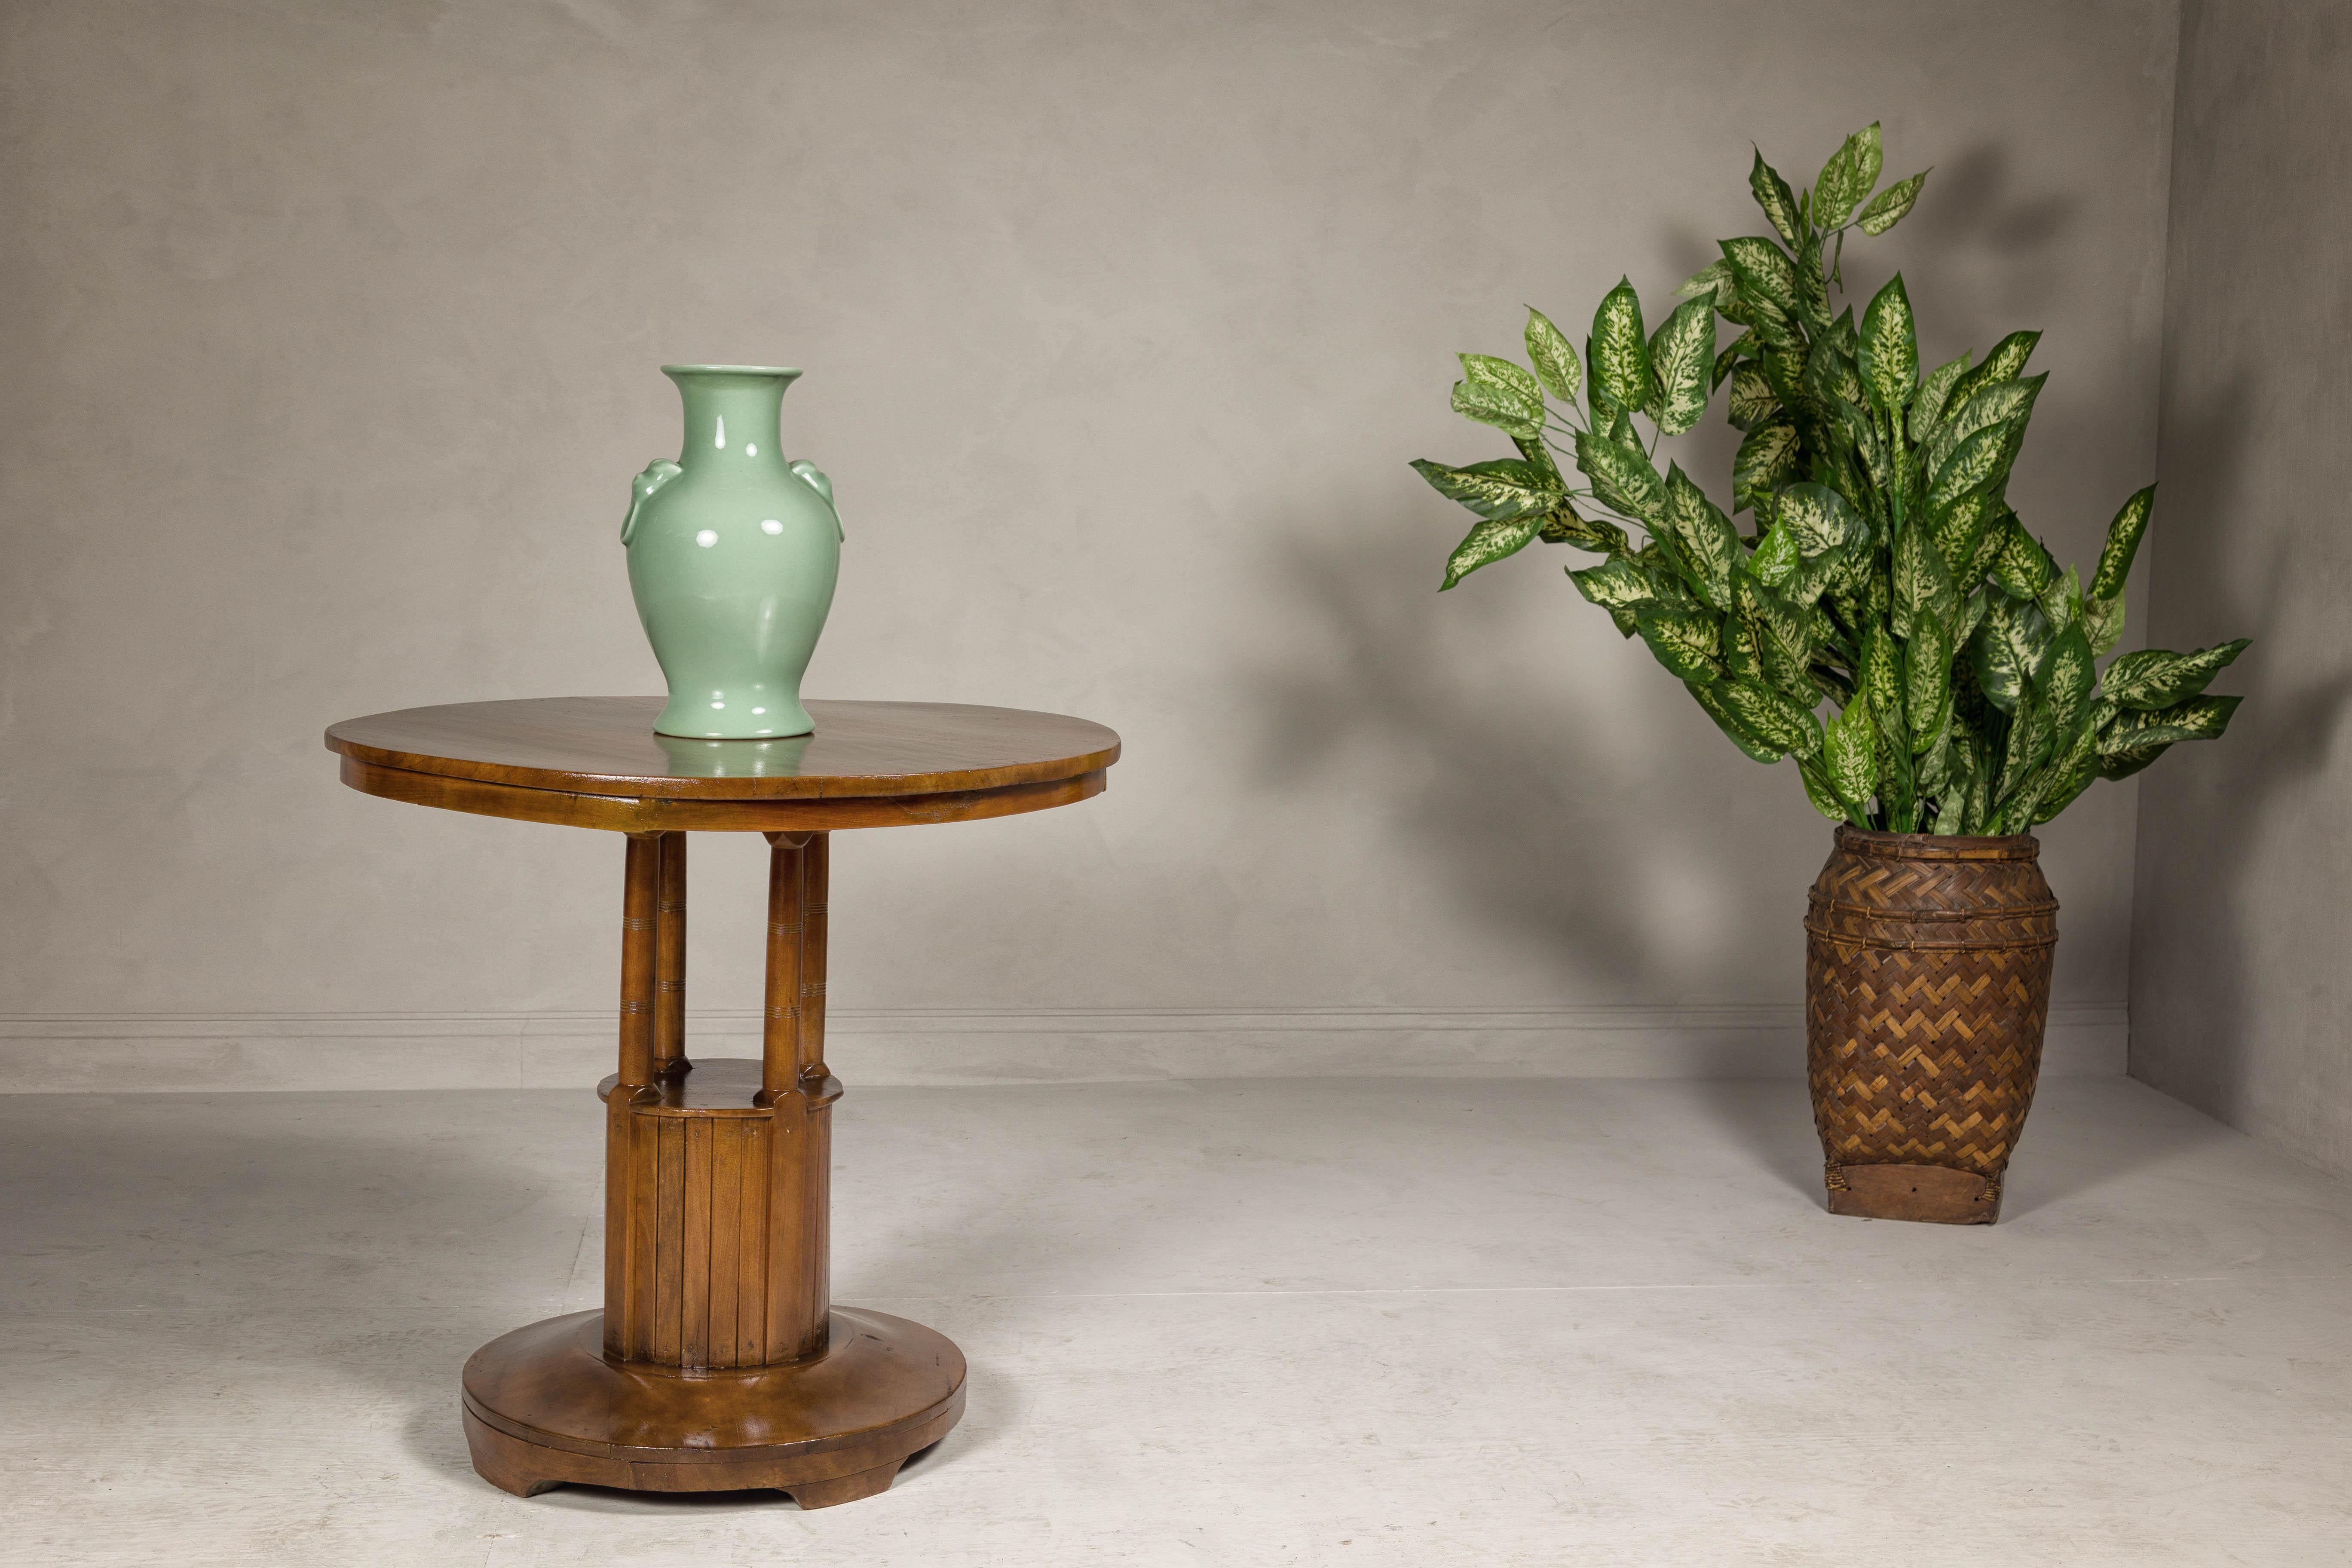 A Midcentury wooden side table with round top, column-shaped supports and tambour base. This Midcentury wooden side table exudes timeless charm and elegance, featuring a round top supported by slender, column-shaped supports adorned with reeded